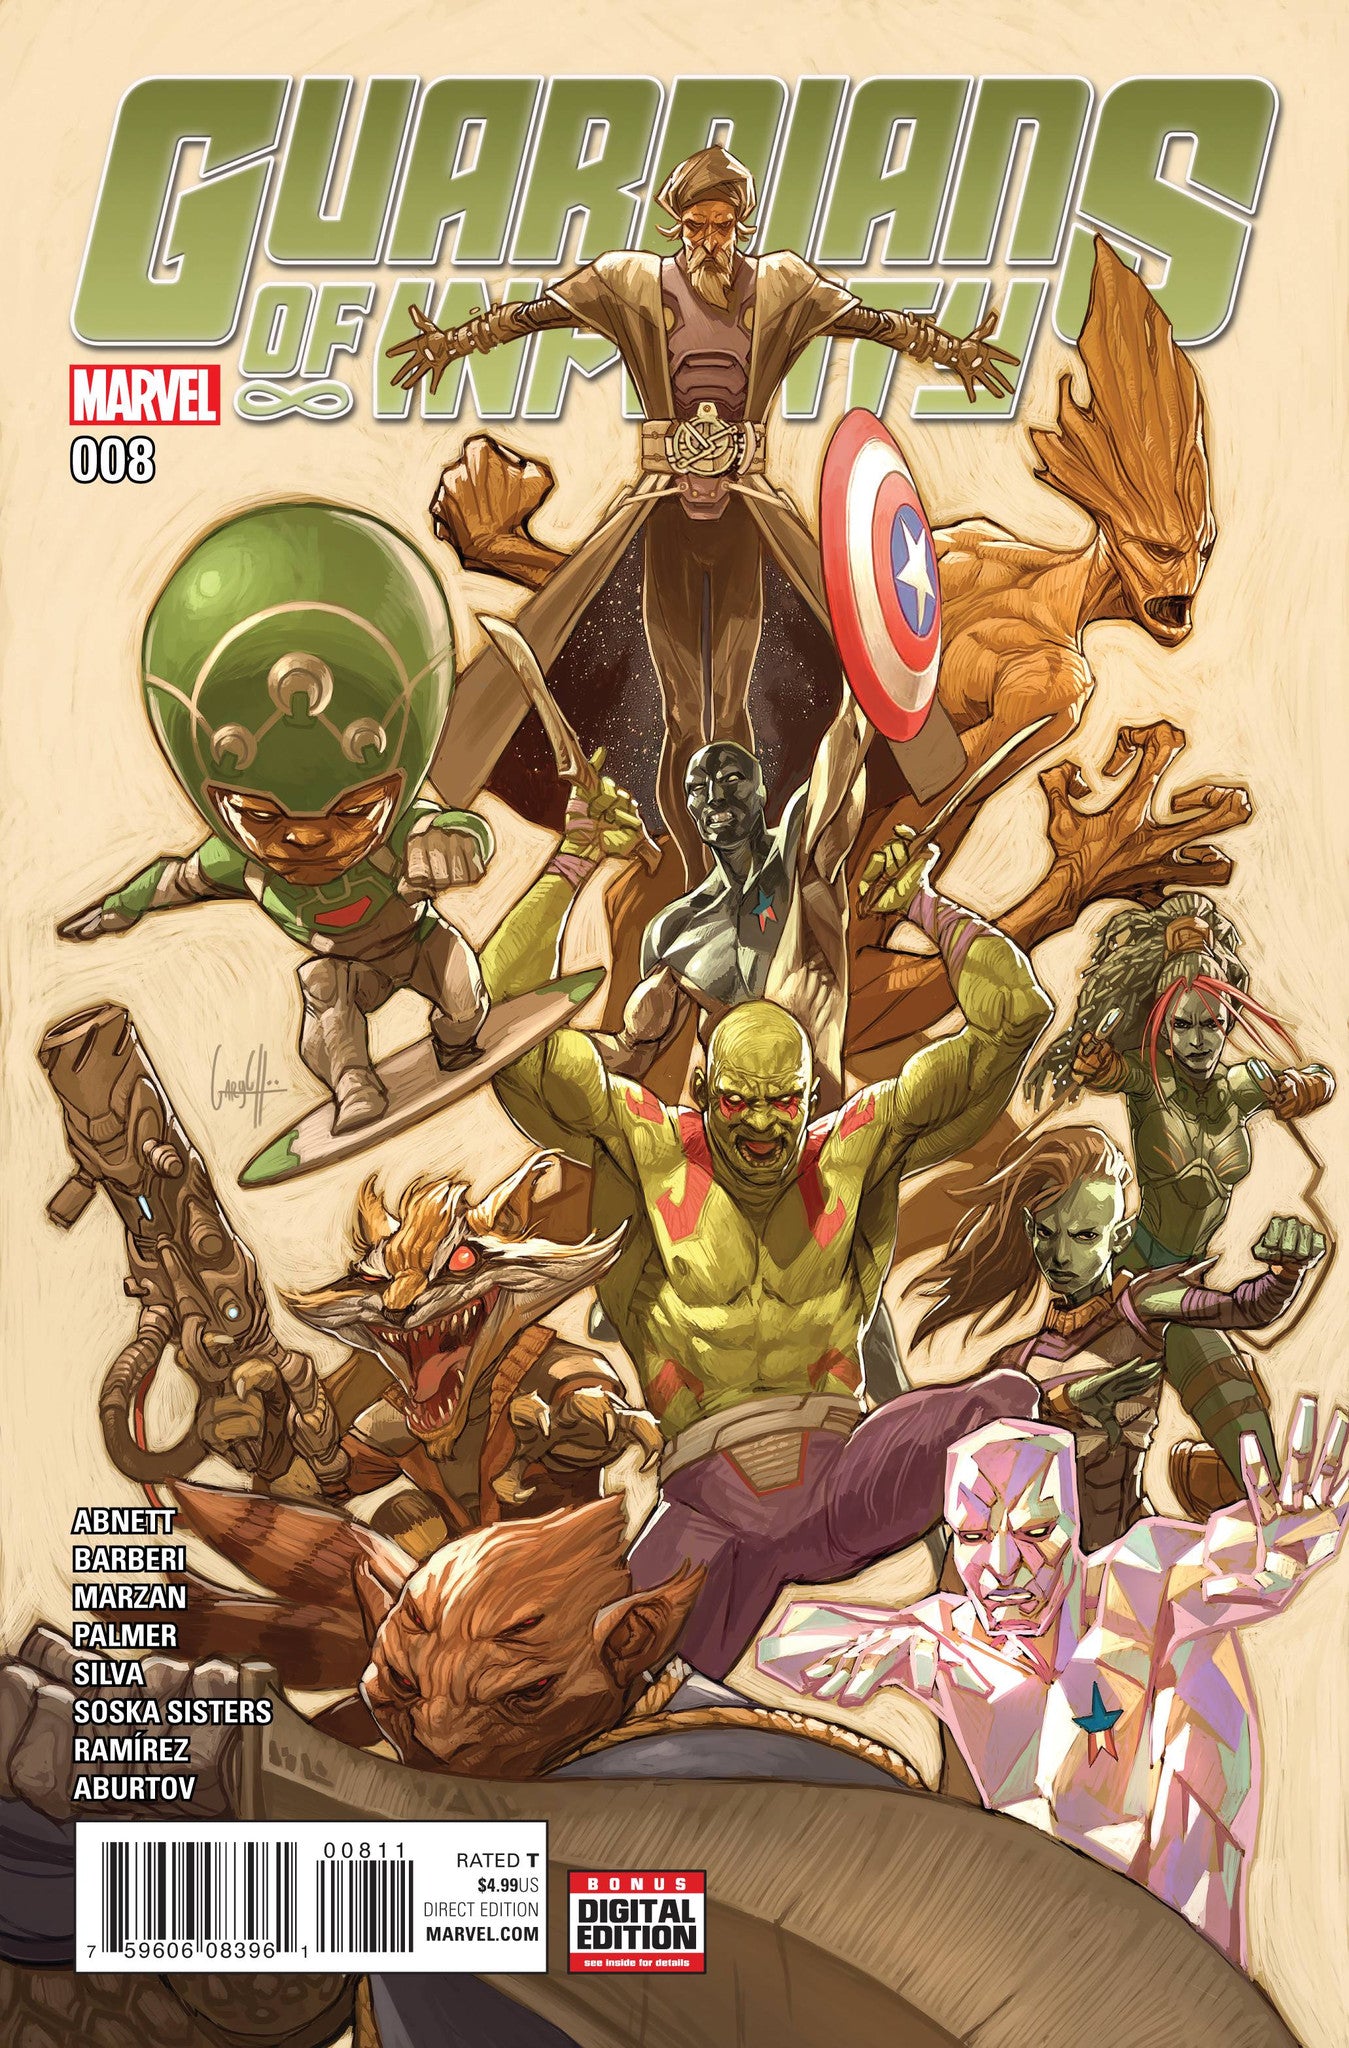 GUARDIANS OF INFINITY #8 COVER